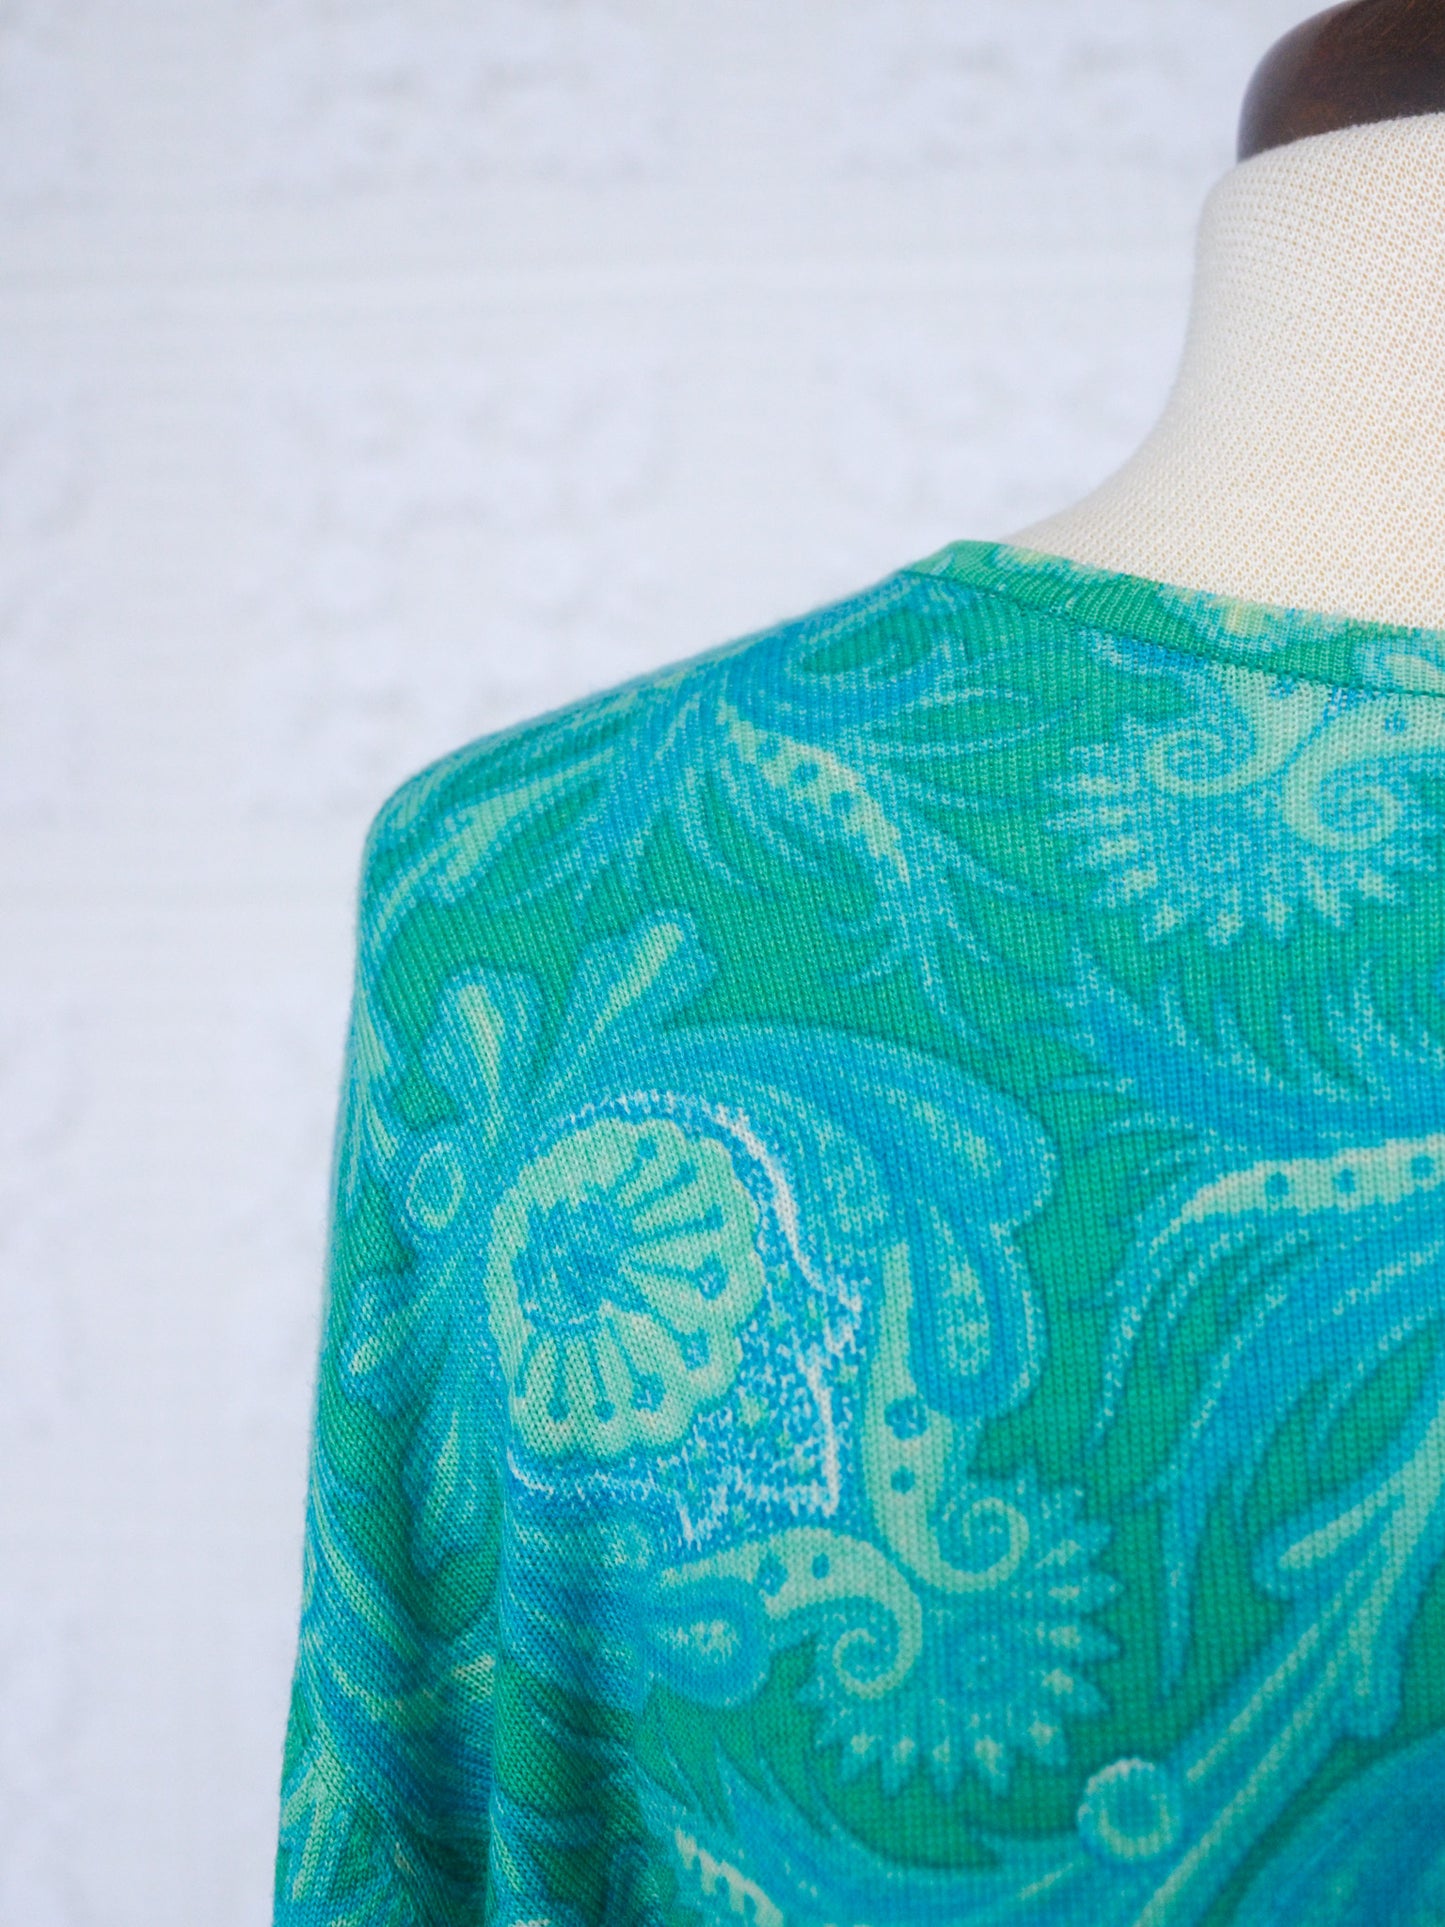 1970s style green and blue large floral print soft long sleeve jumper